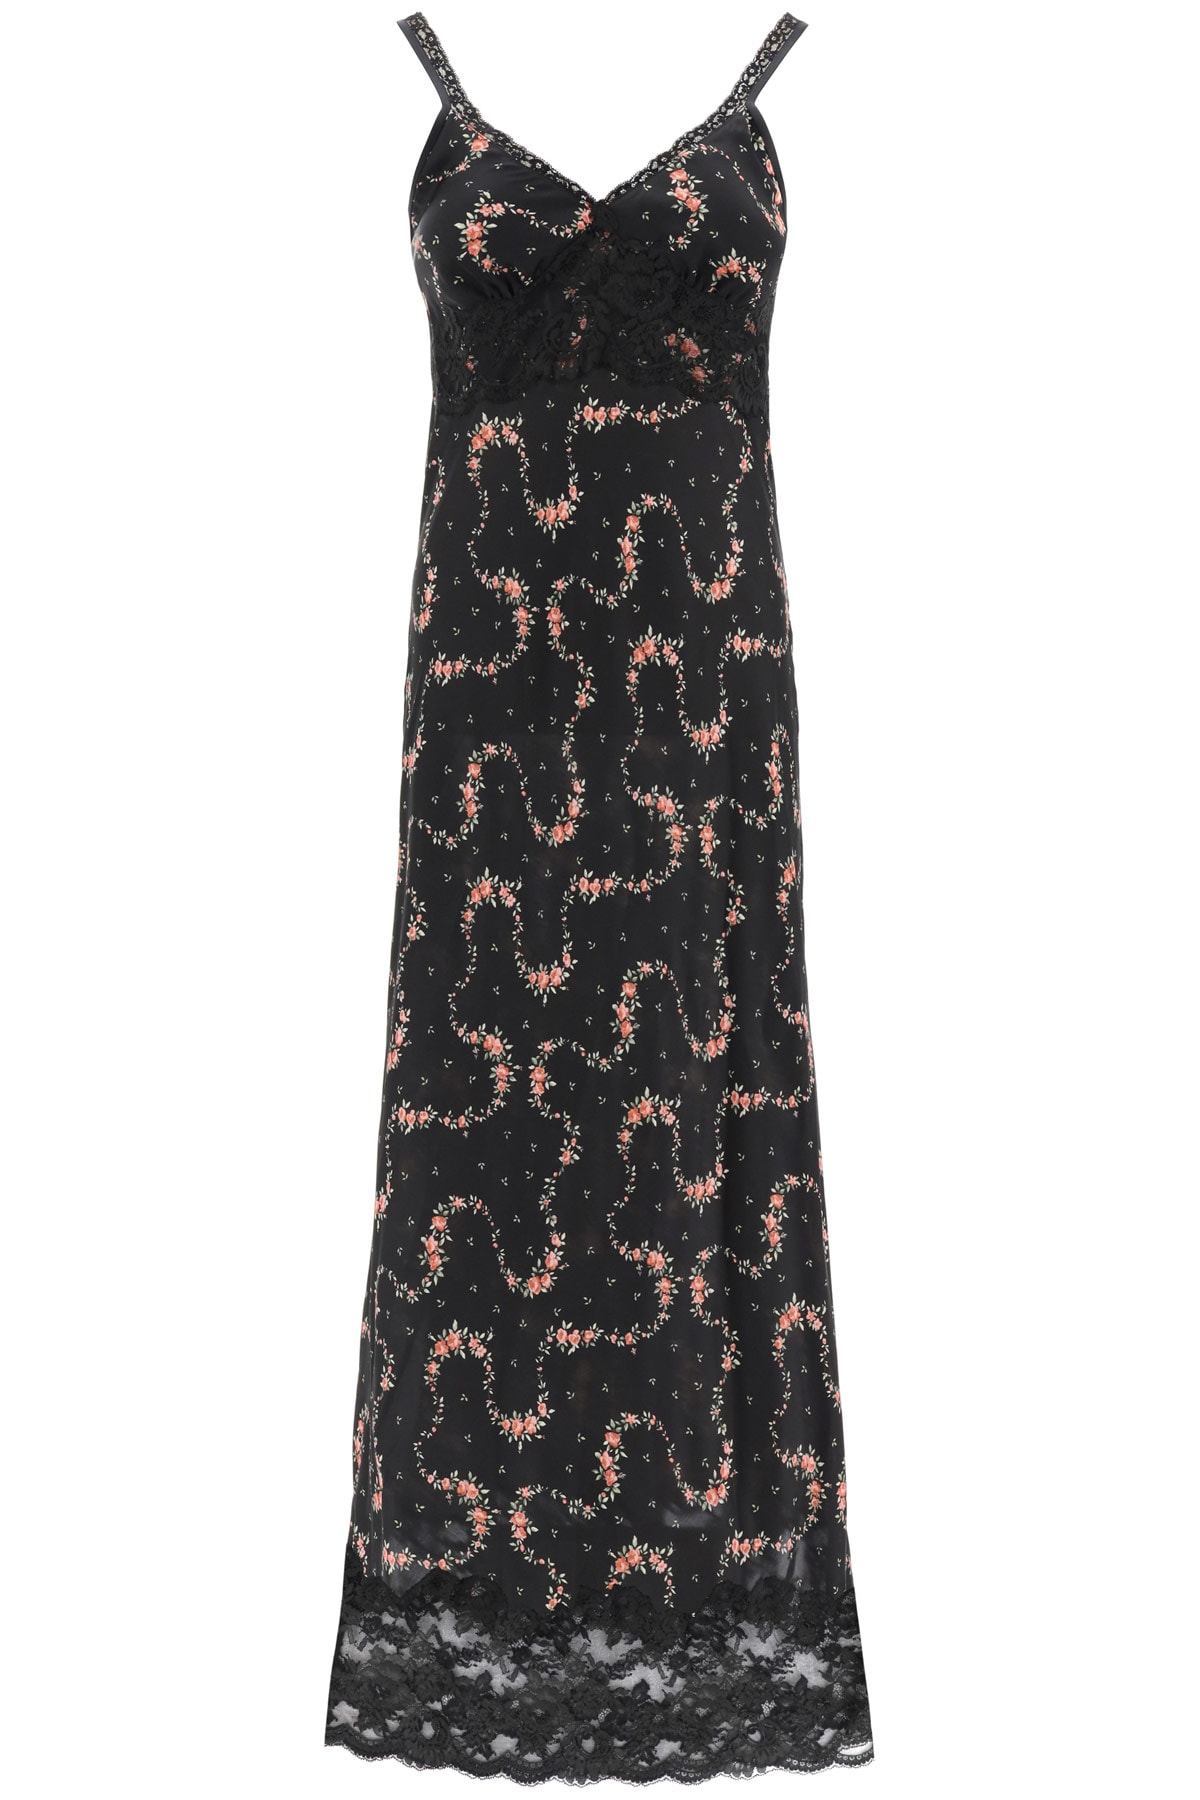 Paco Rabanne Long Floral Dress With Lace